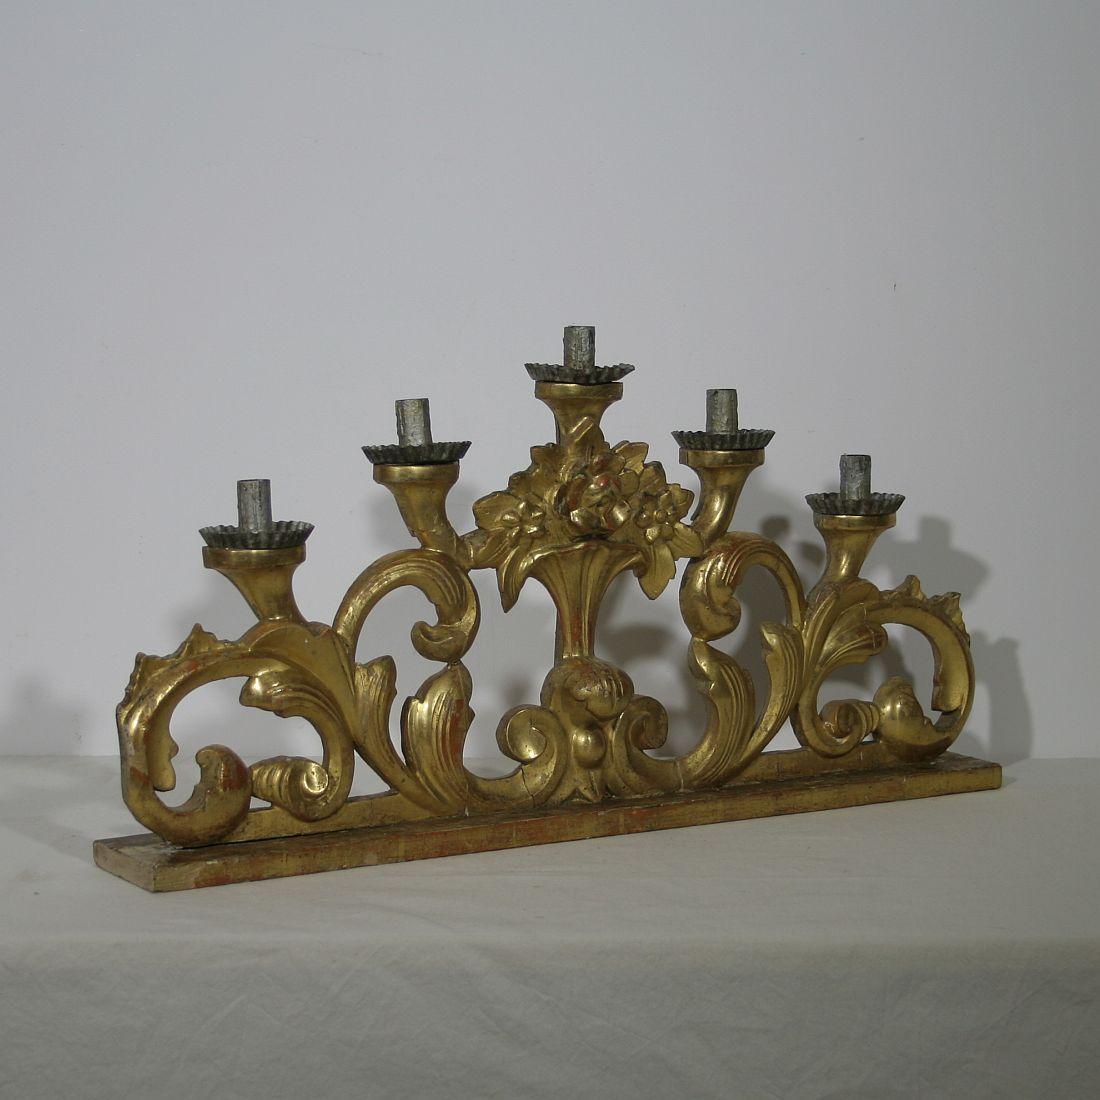 Late 18th Century Italian Carved Giltwood Baroque Candleholder (Barock)